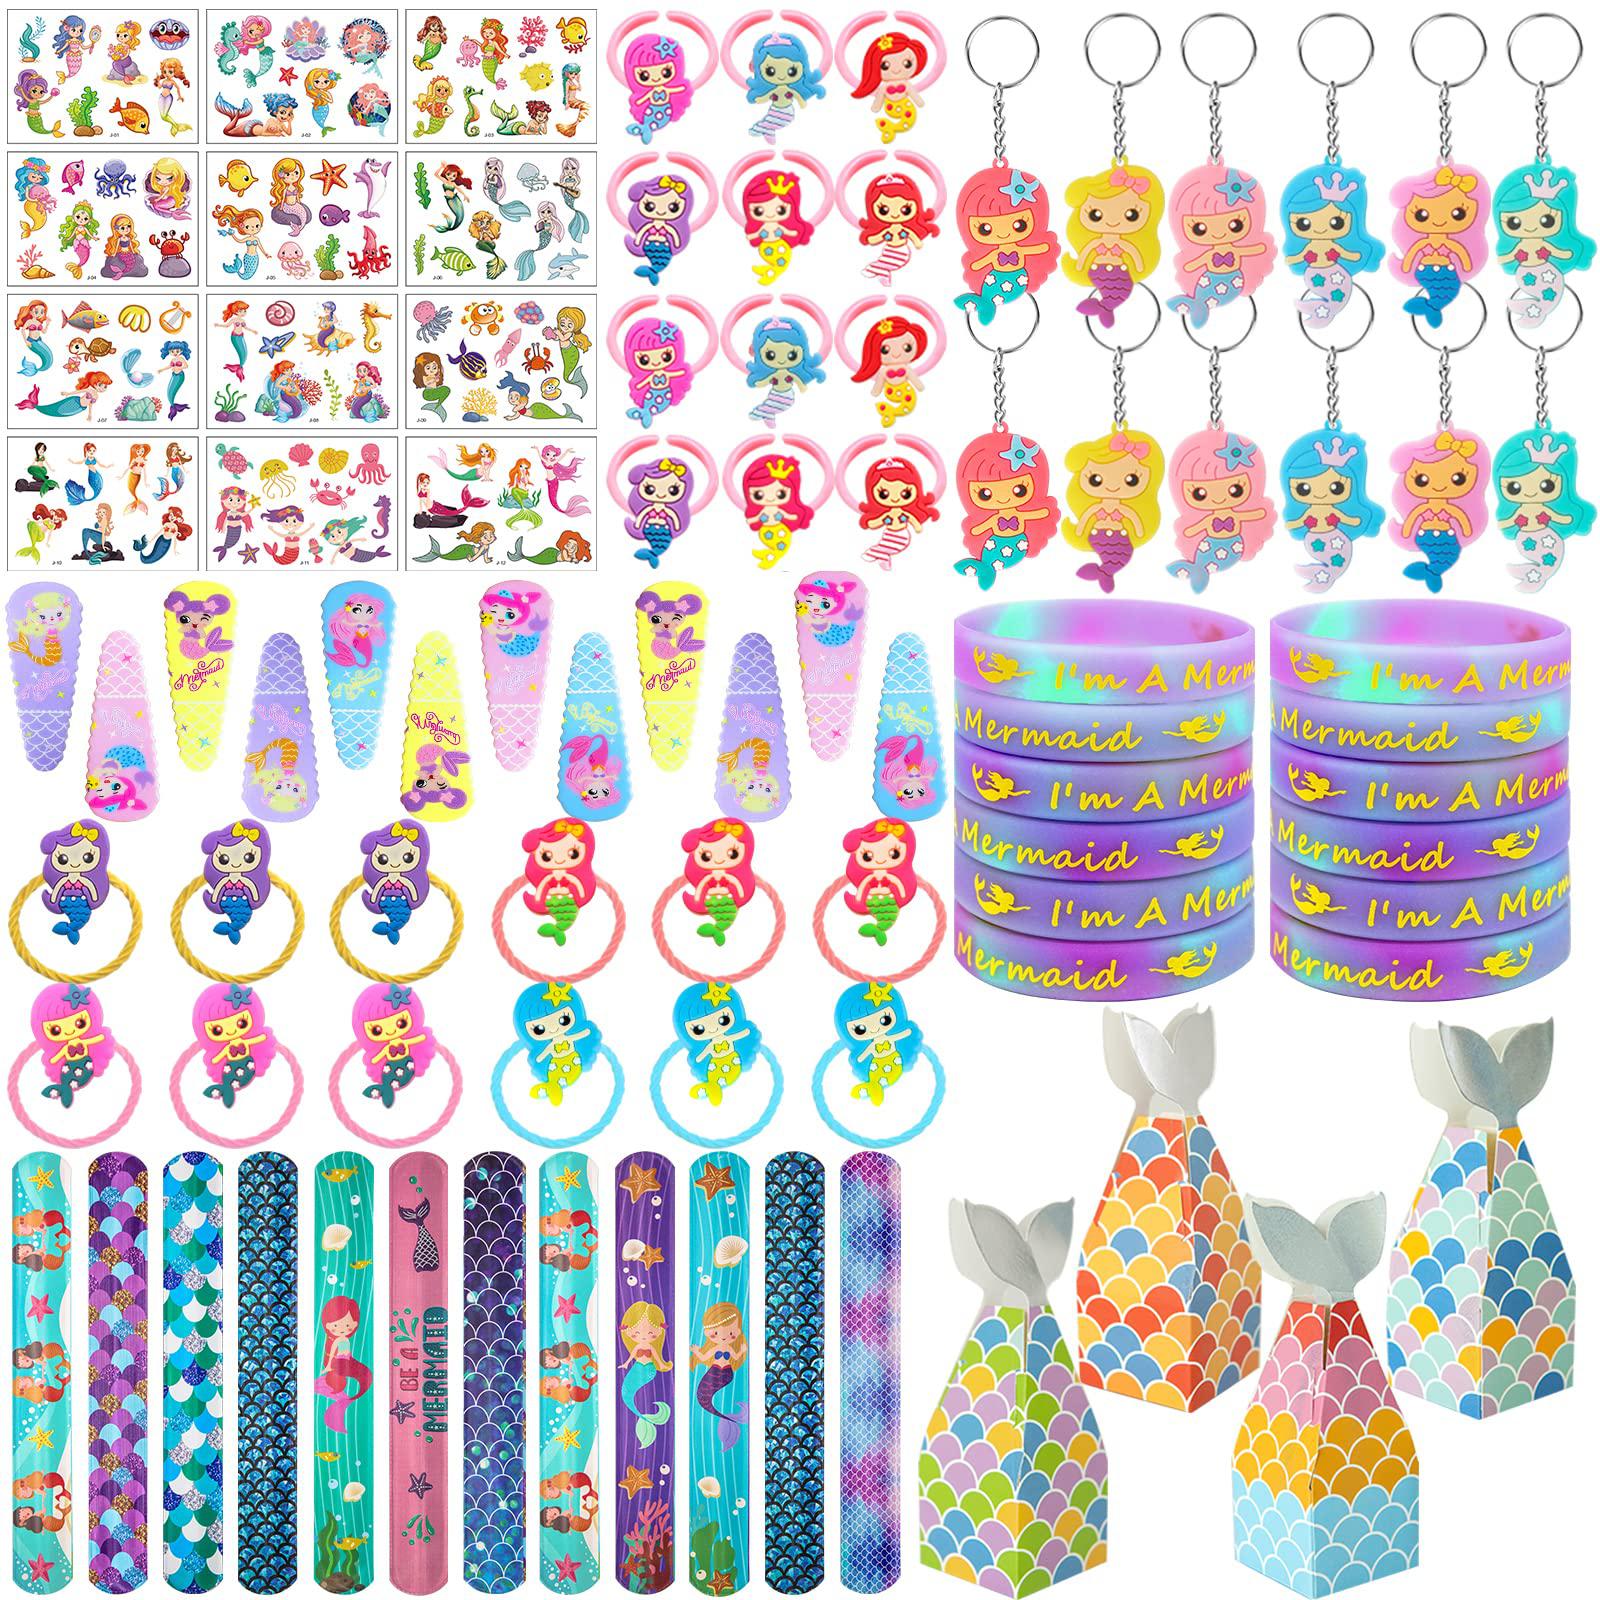 Bluegogo 96 pcs mermaid party favors for kids with bracelets keychains tattoo stickers slap bracelets rings rubber bands hairpins merm